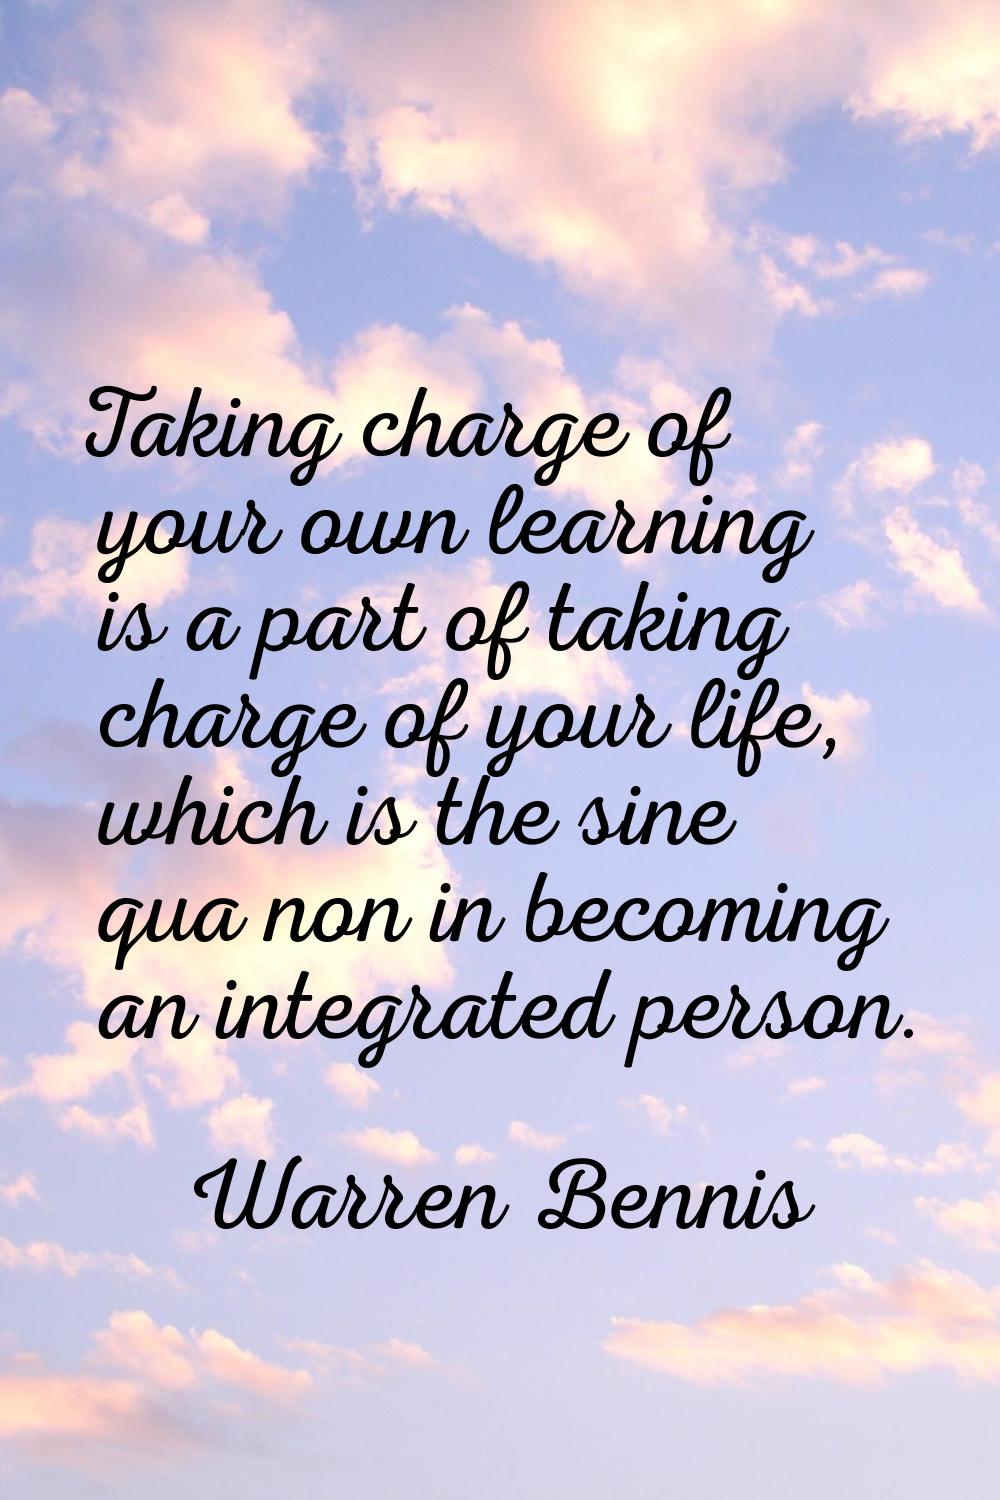 Taking charge of your own learning is a part of taking charge of your life, which is the sine qua n